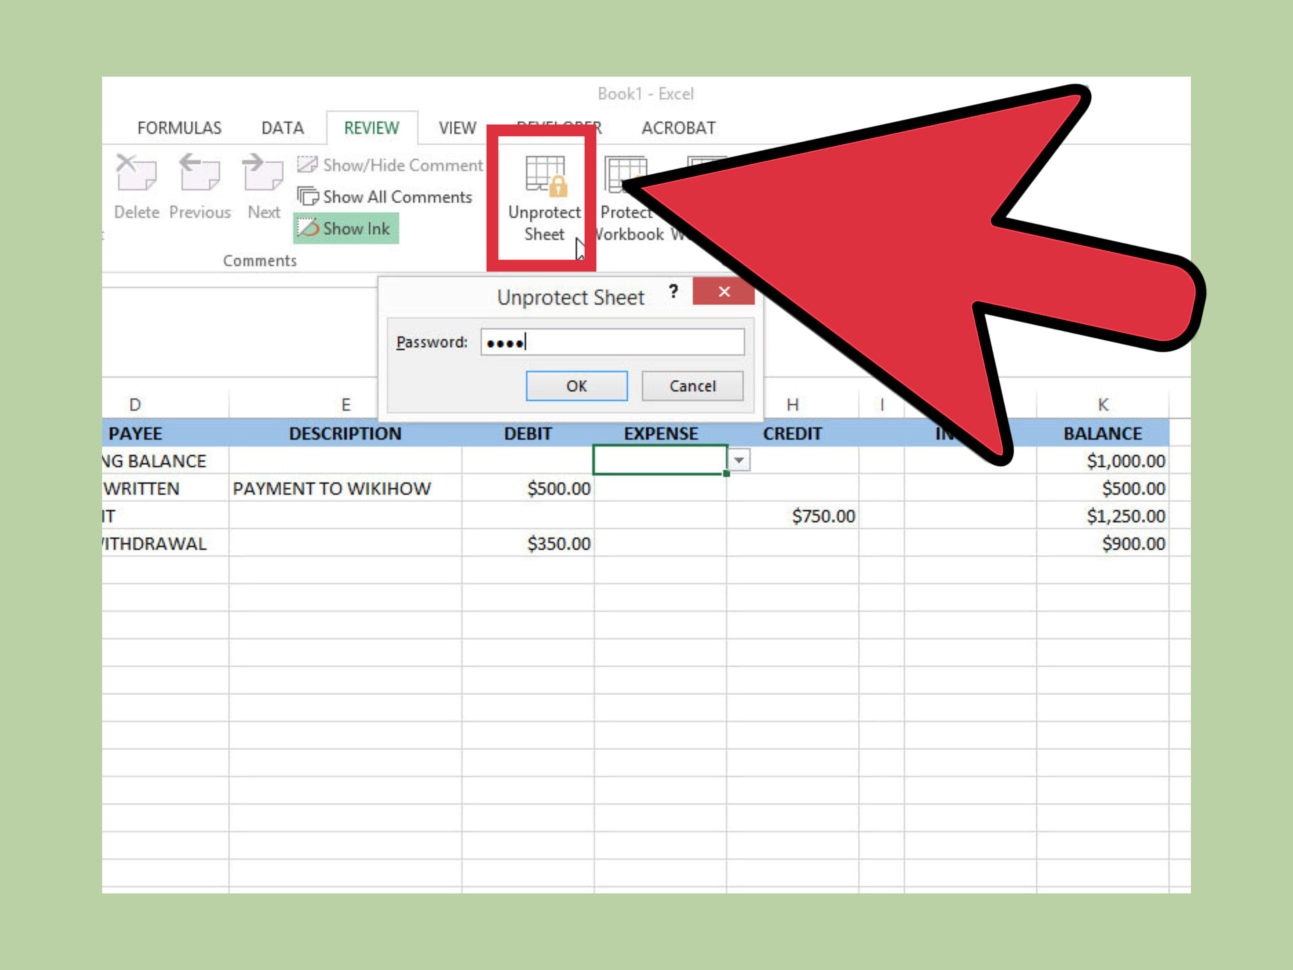 how-to-view-all-sheets-in-excel-at-once-5-easy-ways